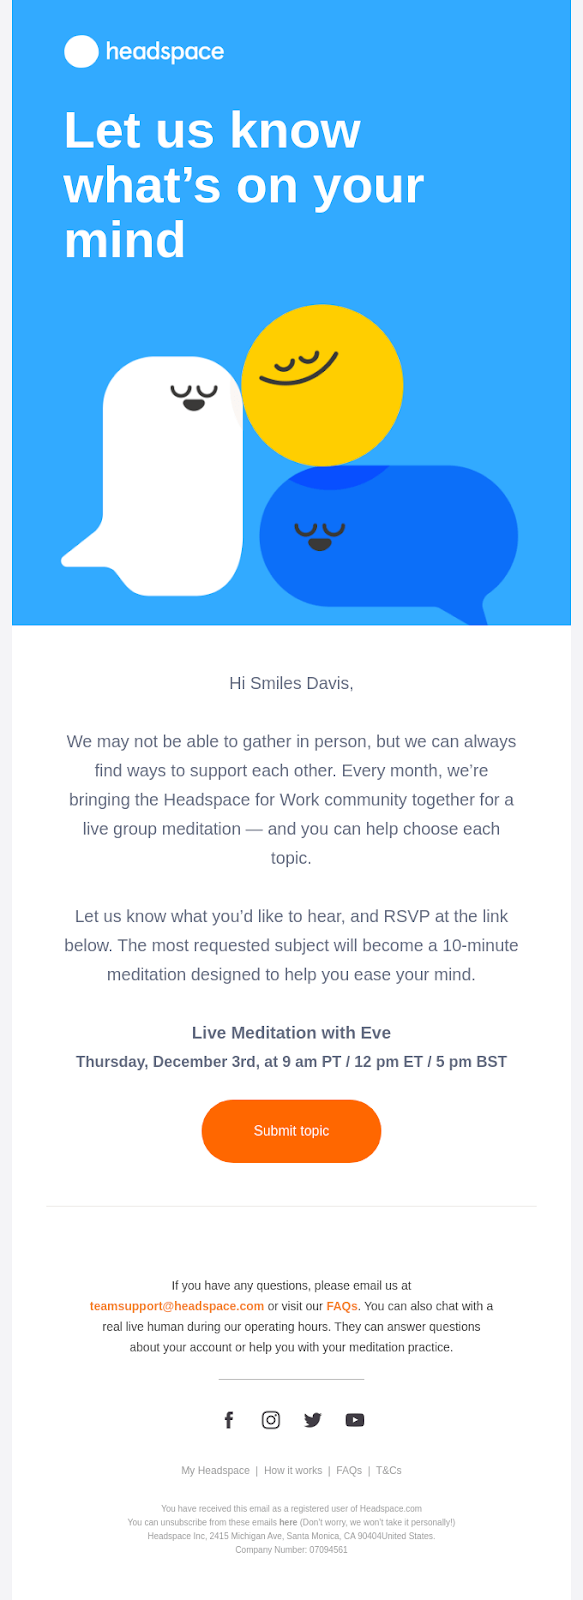 Invitation email by Headspace where you can submit your question beforehand